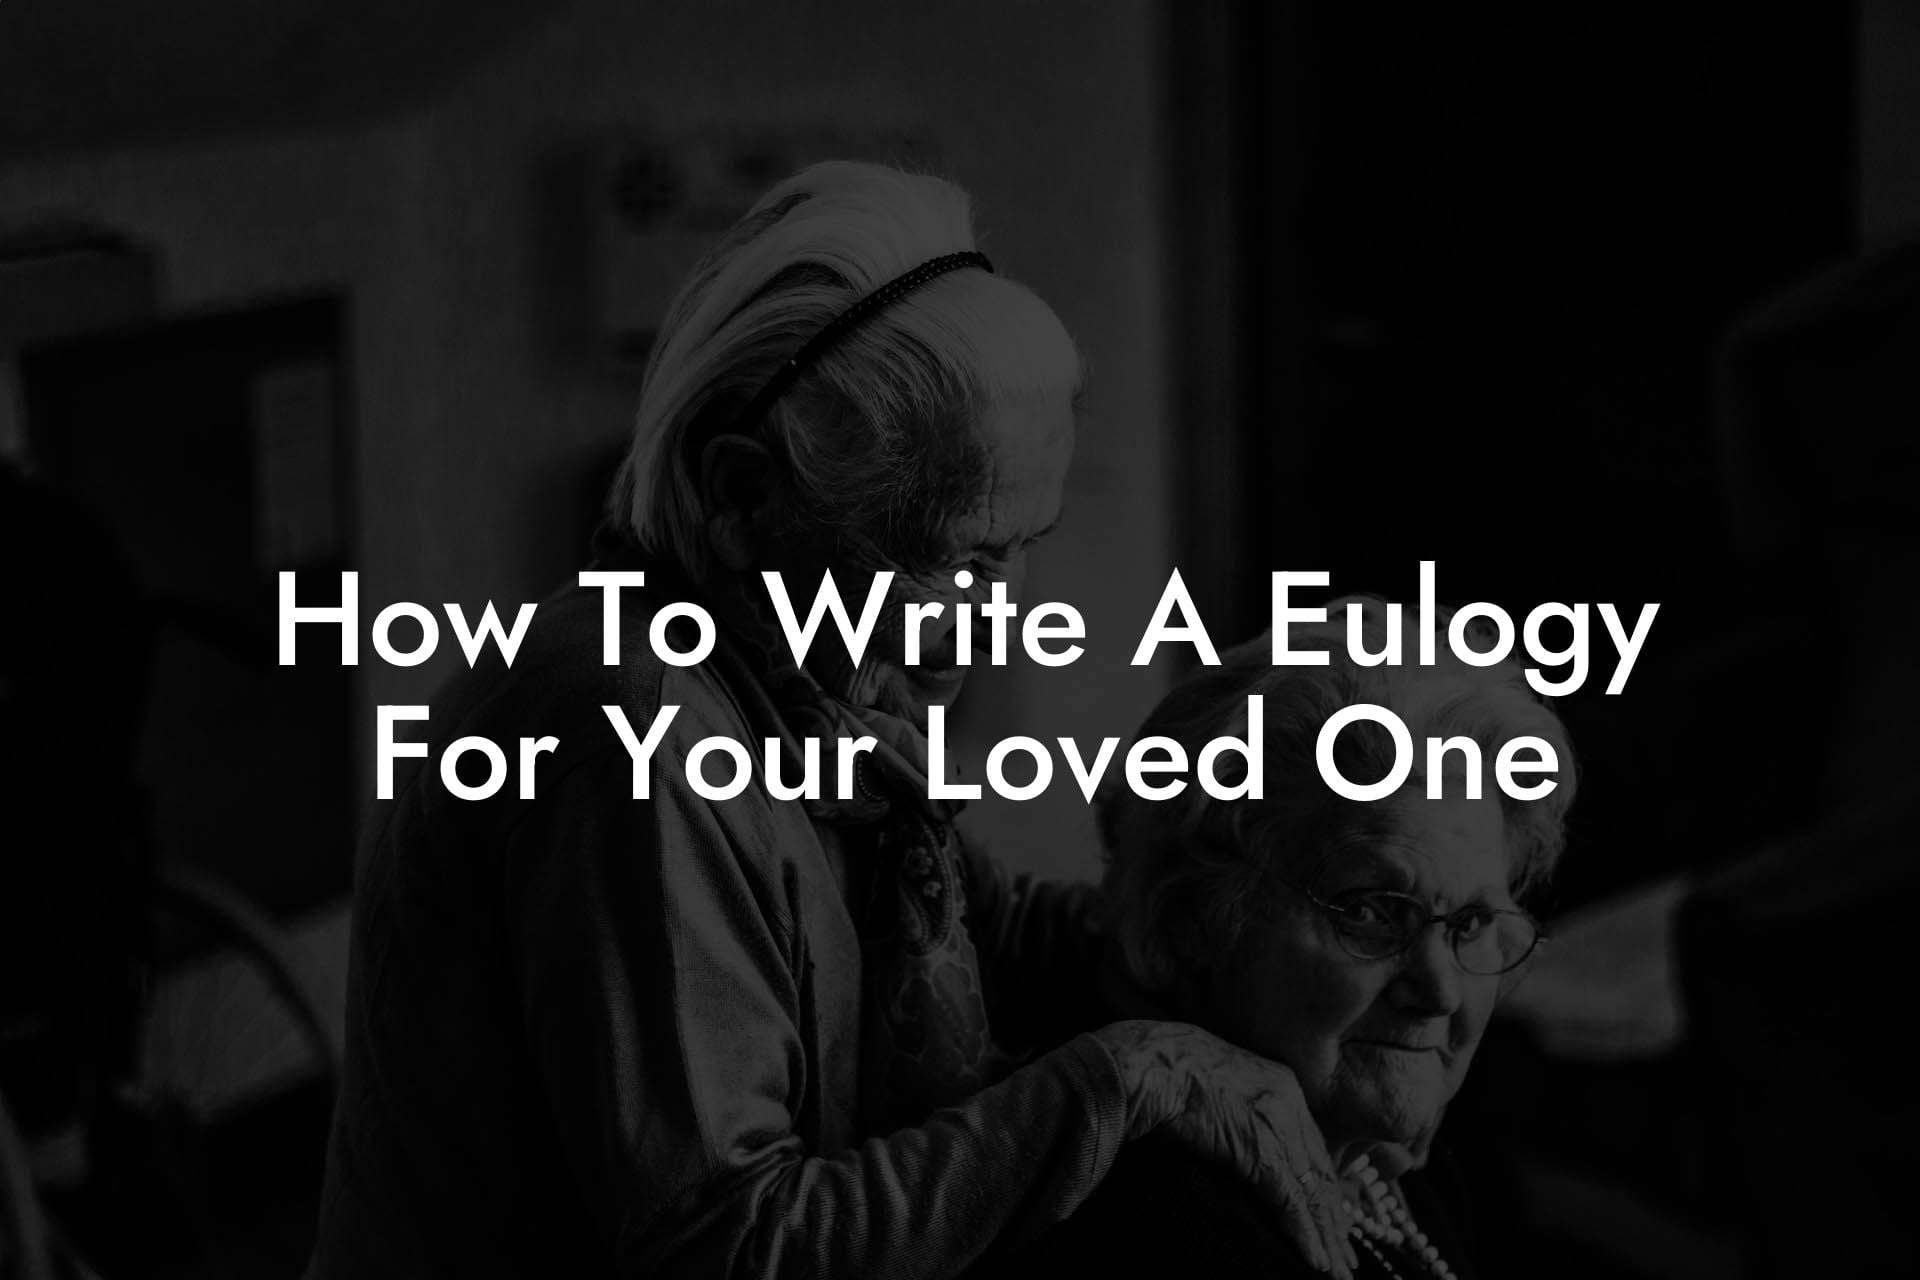 How To Write A Eulogy For Your Loved One